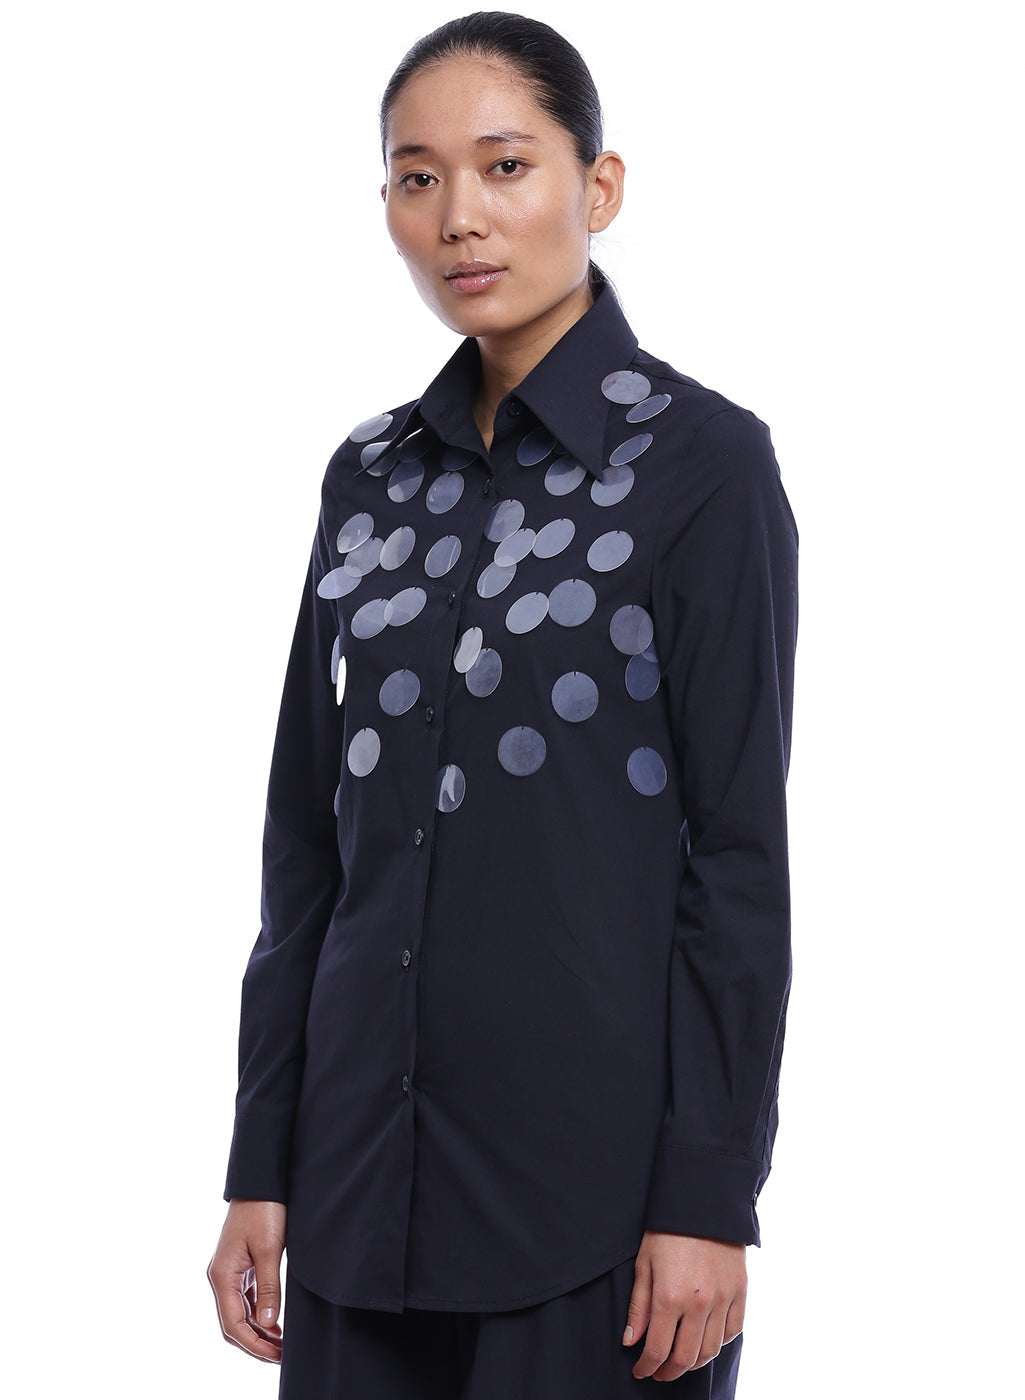 Sequin Embroidered Shirt - Genes online store 2020